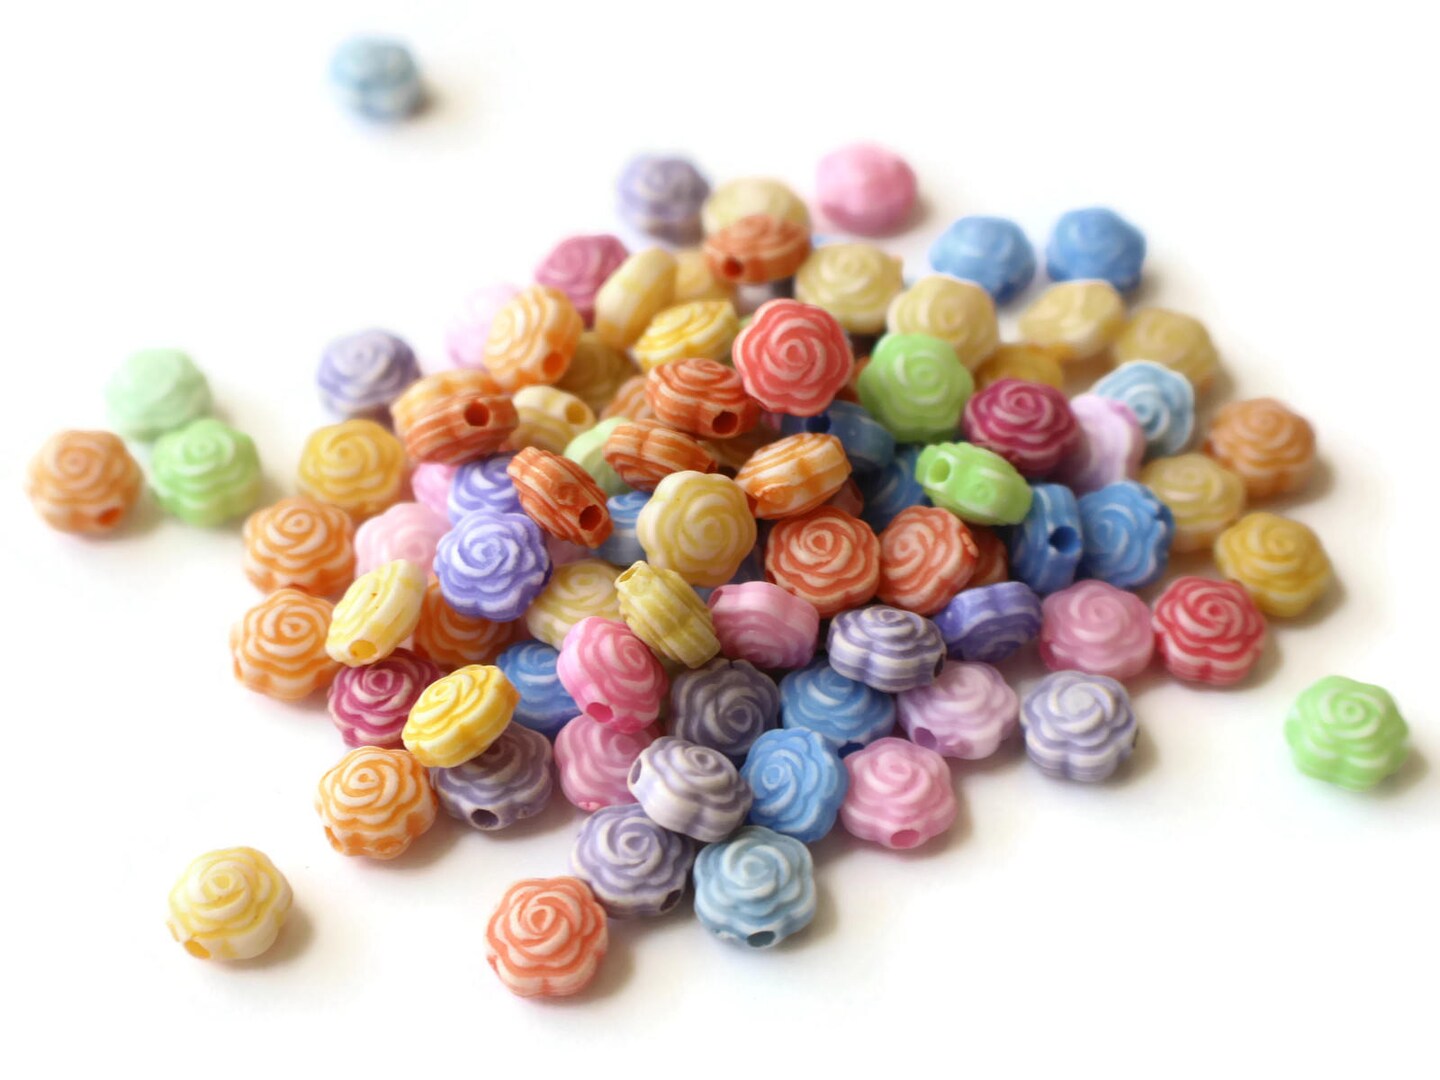 100 8mm Small Plastic Mixed Color Rose Flower Beads